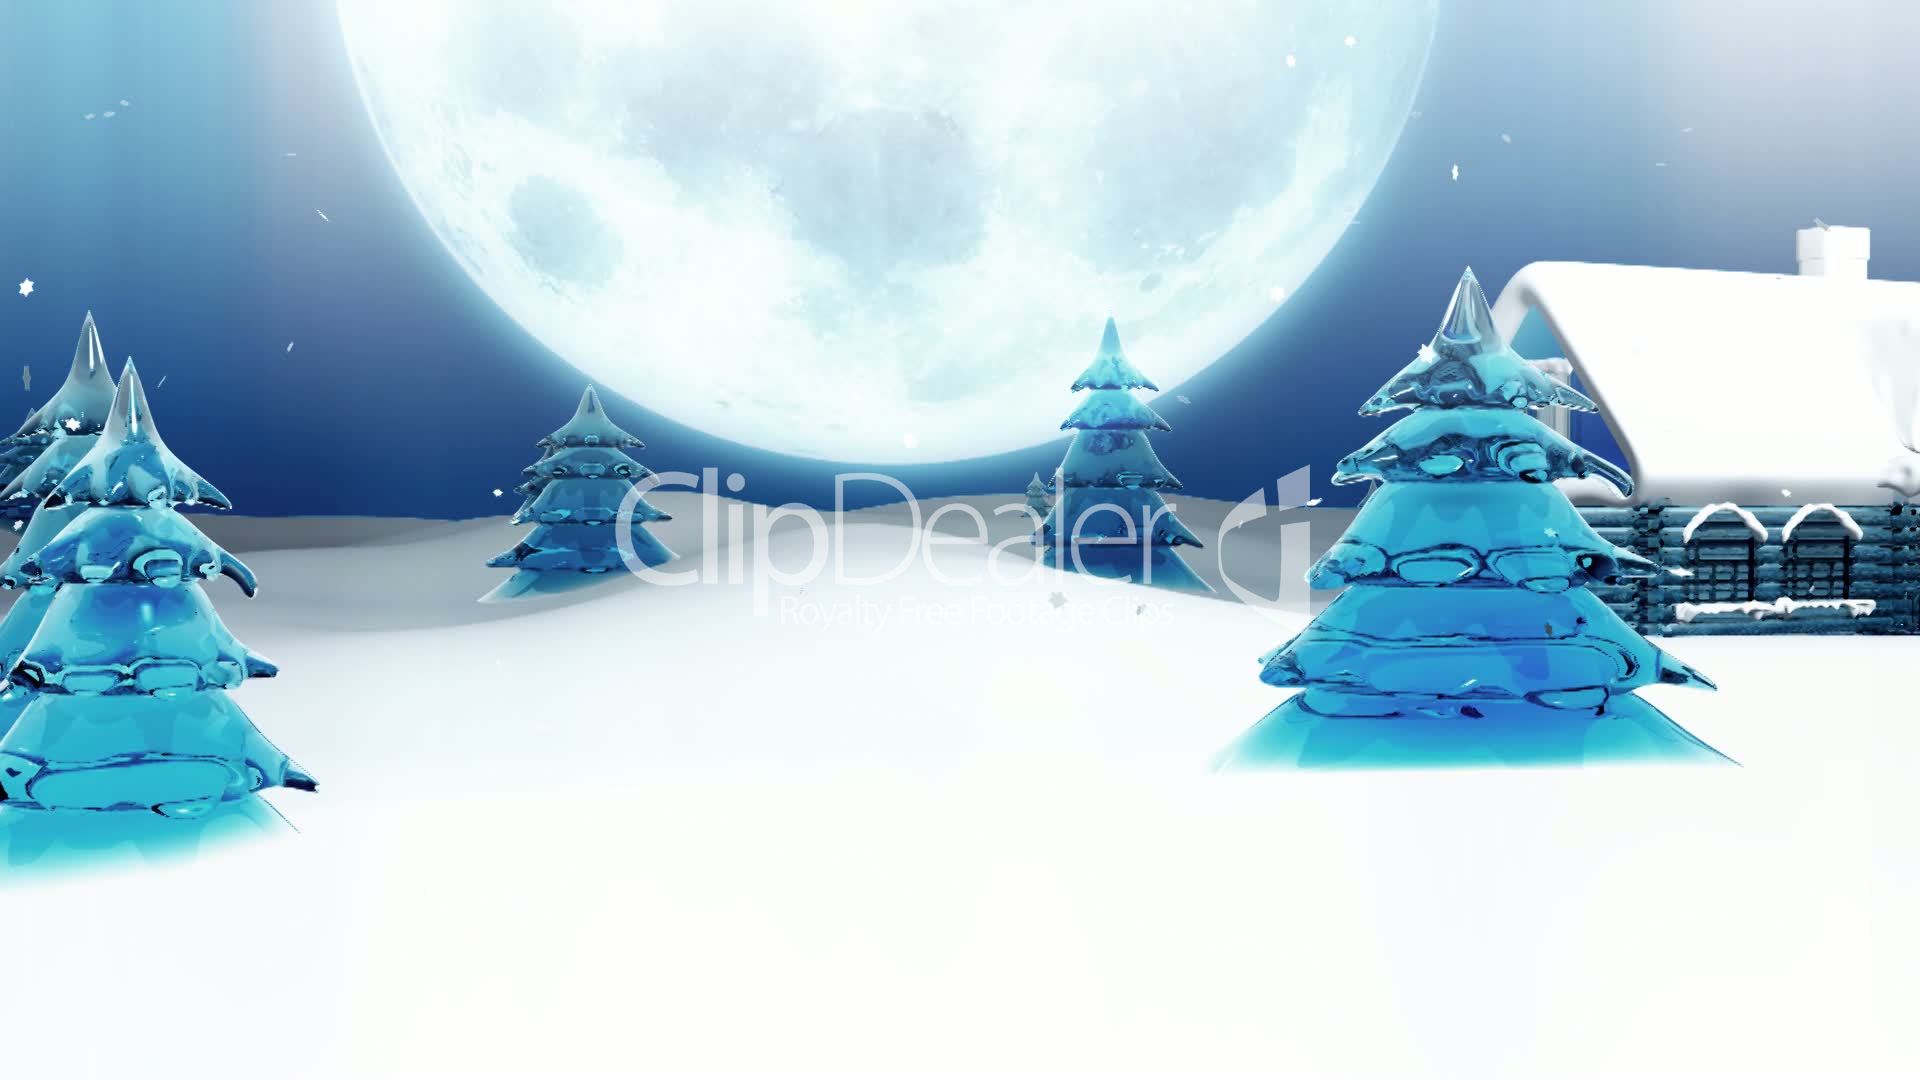 Christmas Eve and Peaceful Town: Royalty-free video and stock footage